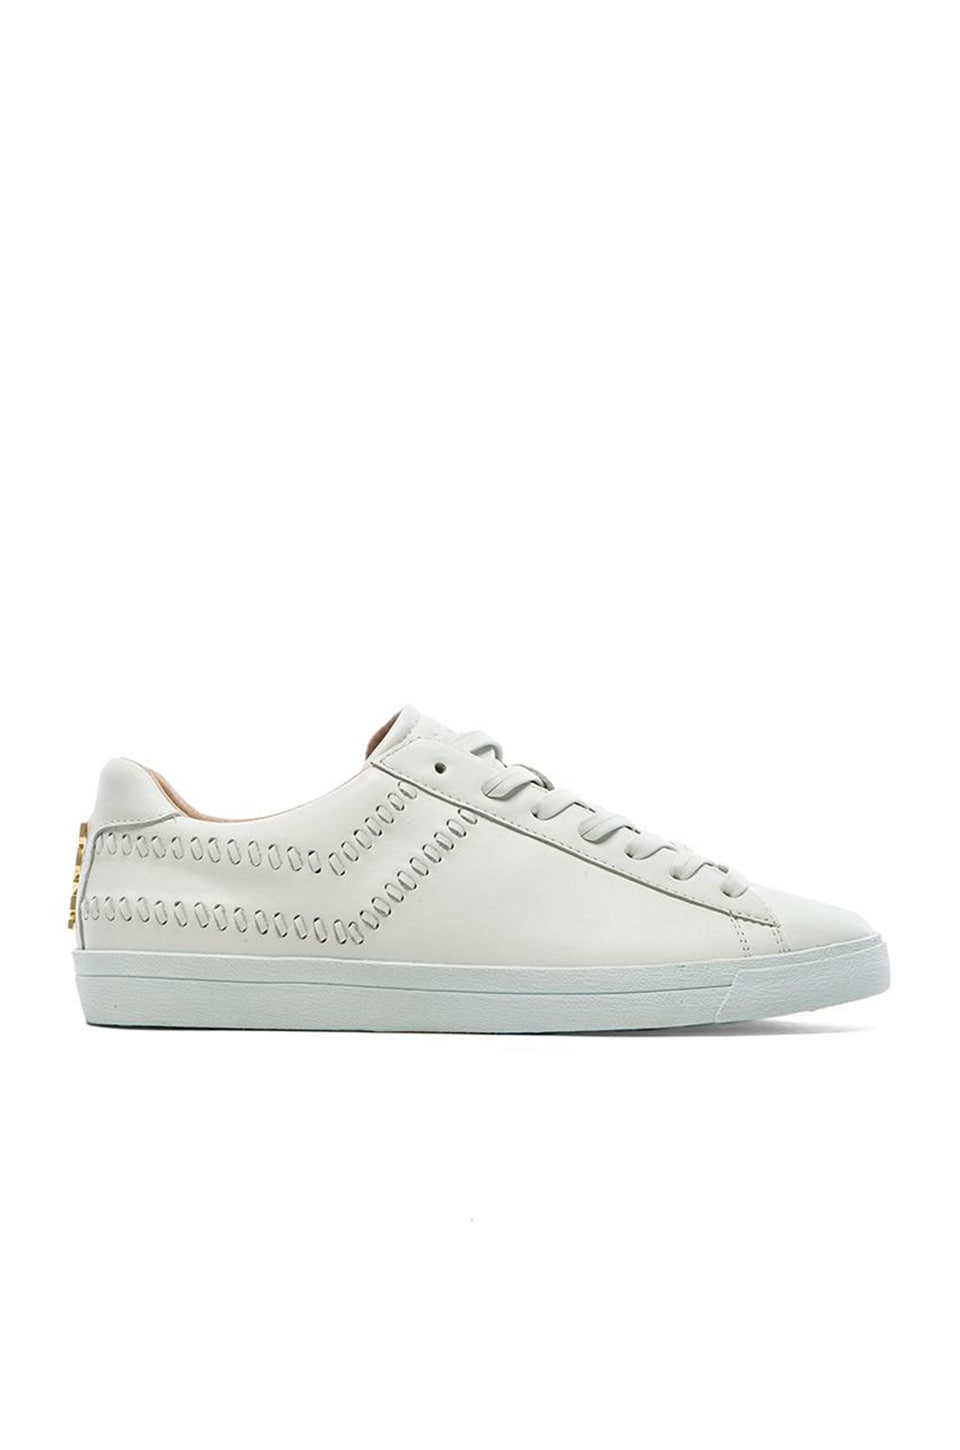 Pony Topstar Ox Leather Lux in White 